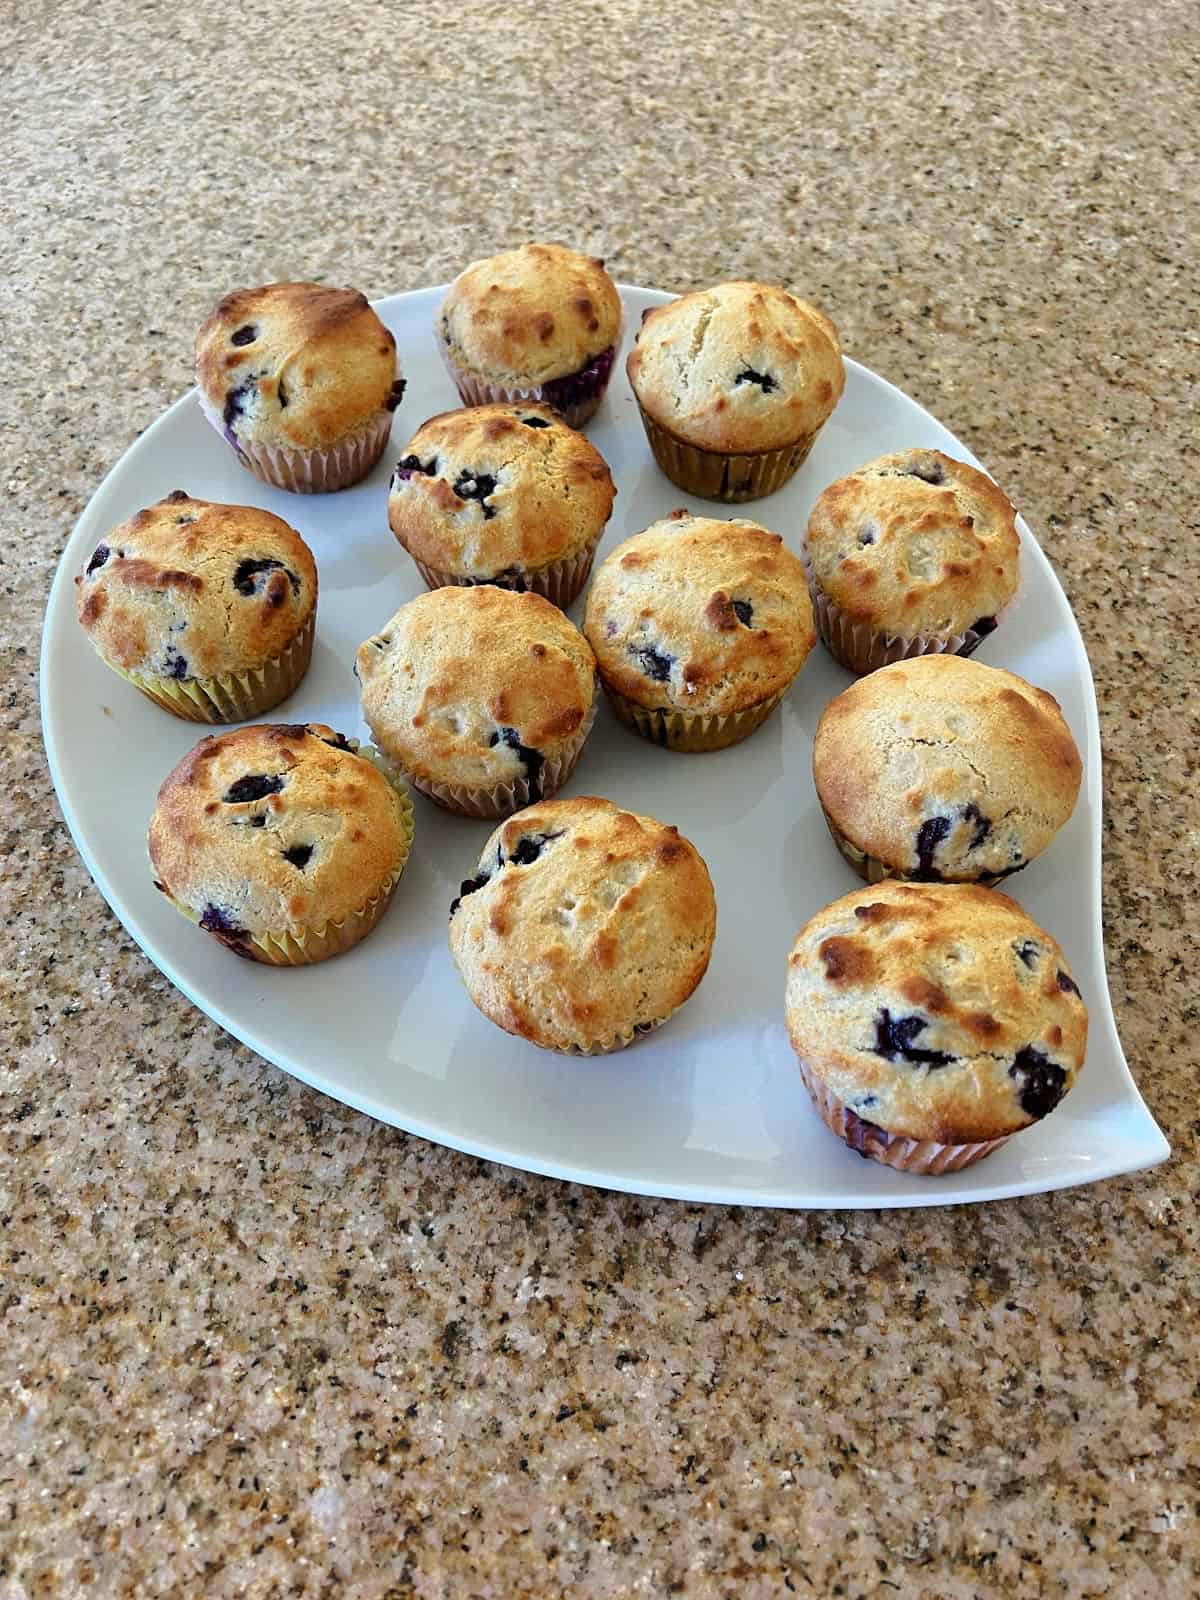 tray of blueberry muffins made with pancake mix.